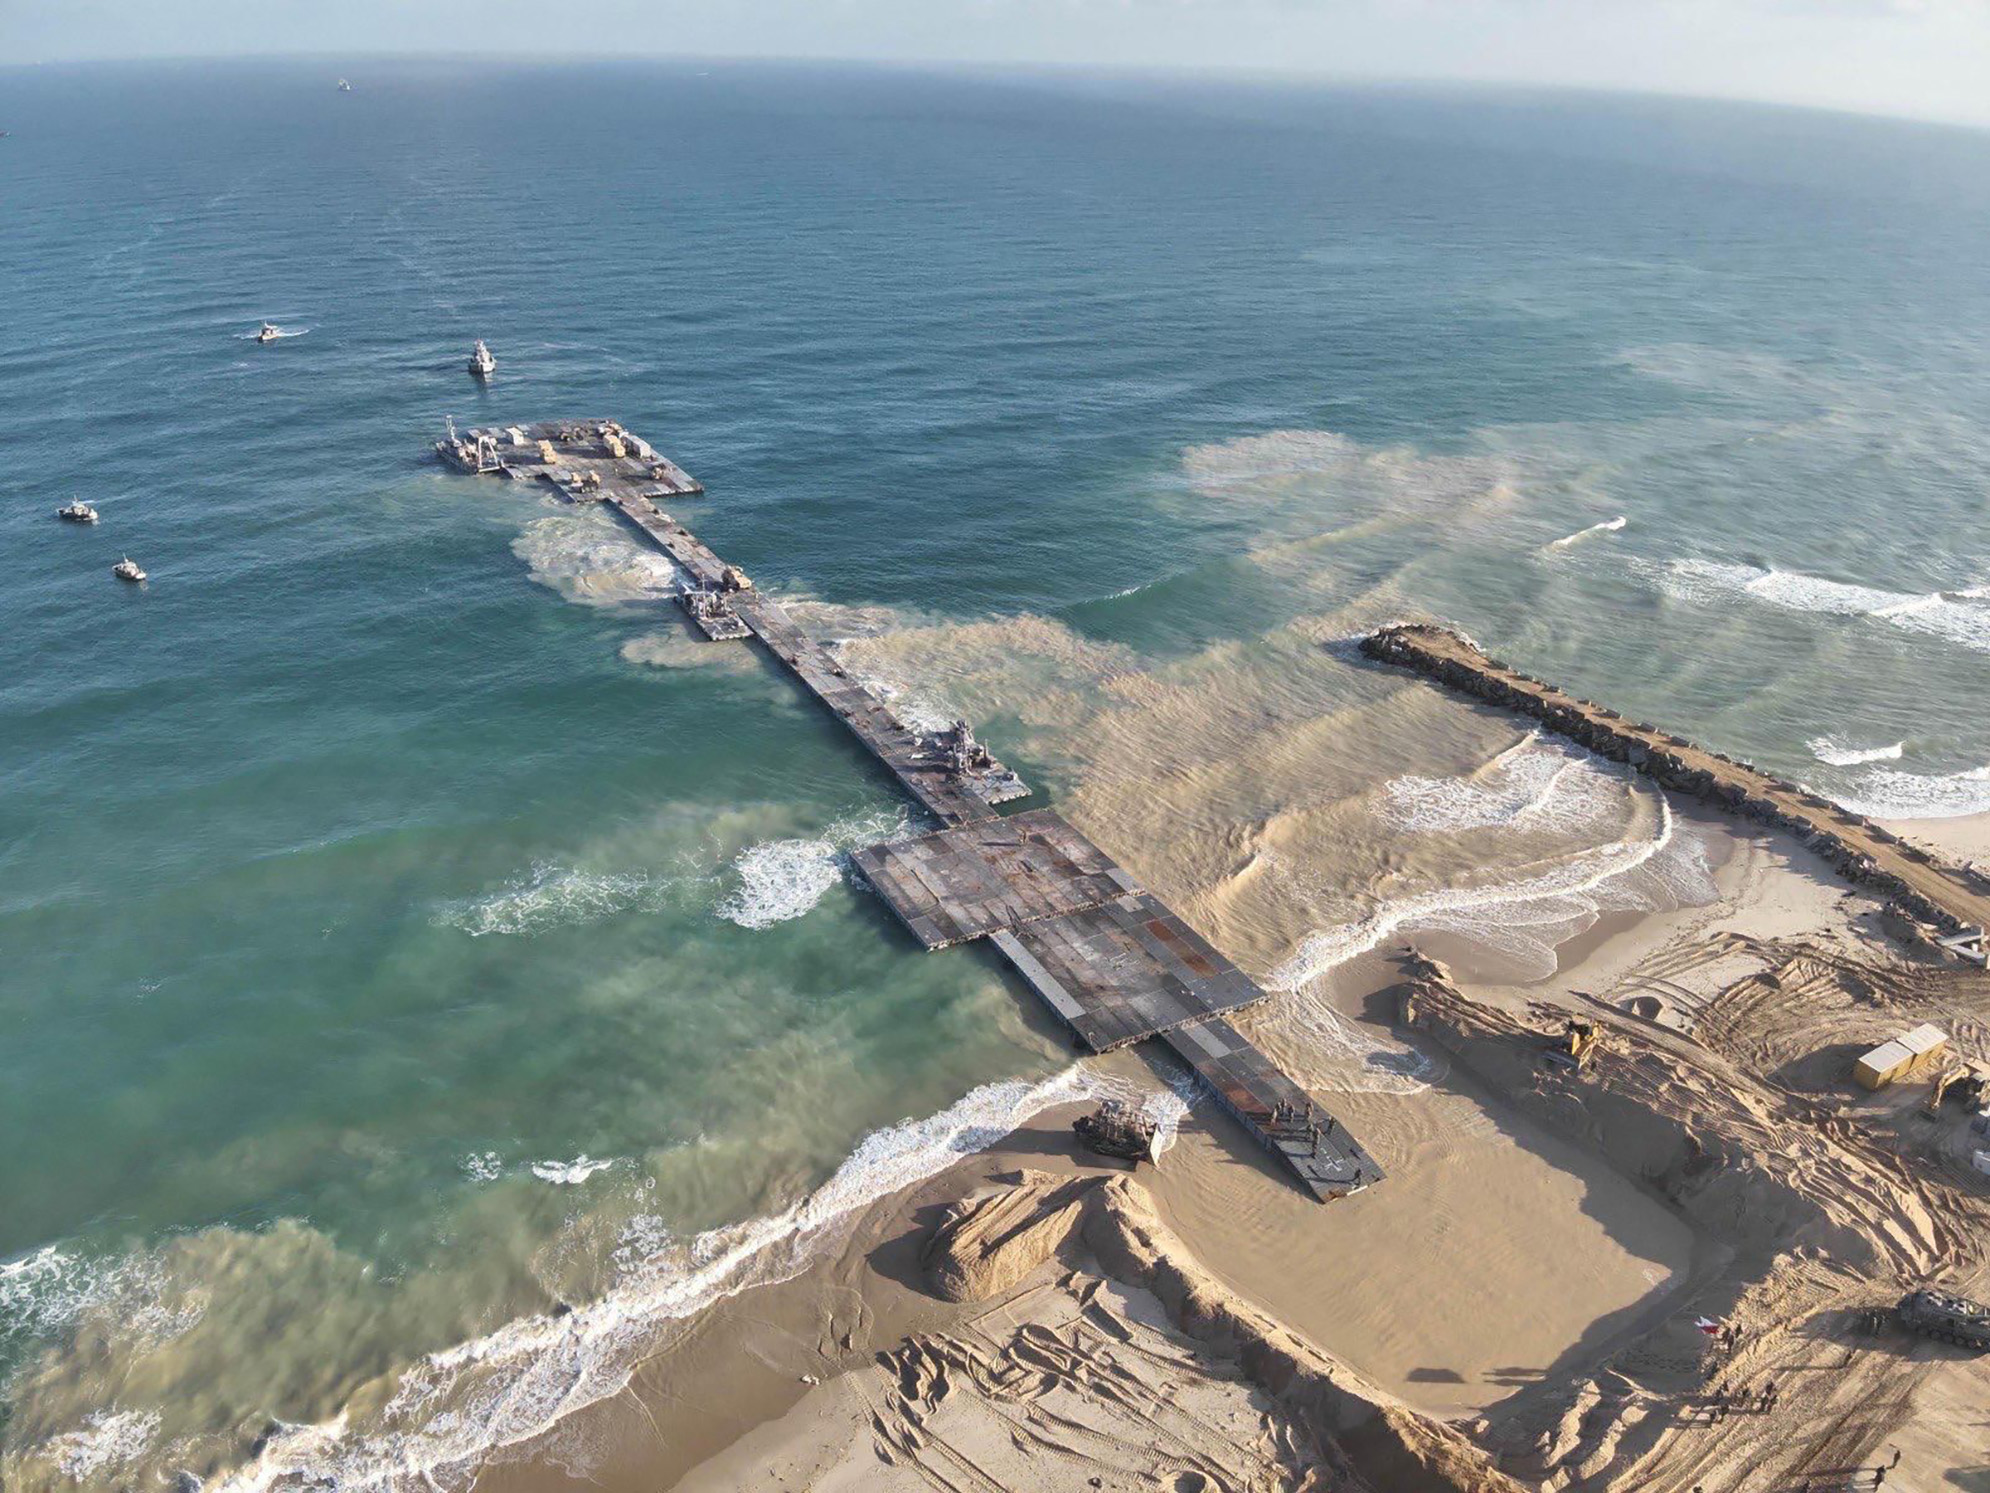 image Gaza aid jetty being reattached after repairs